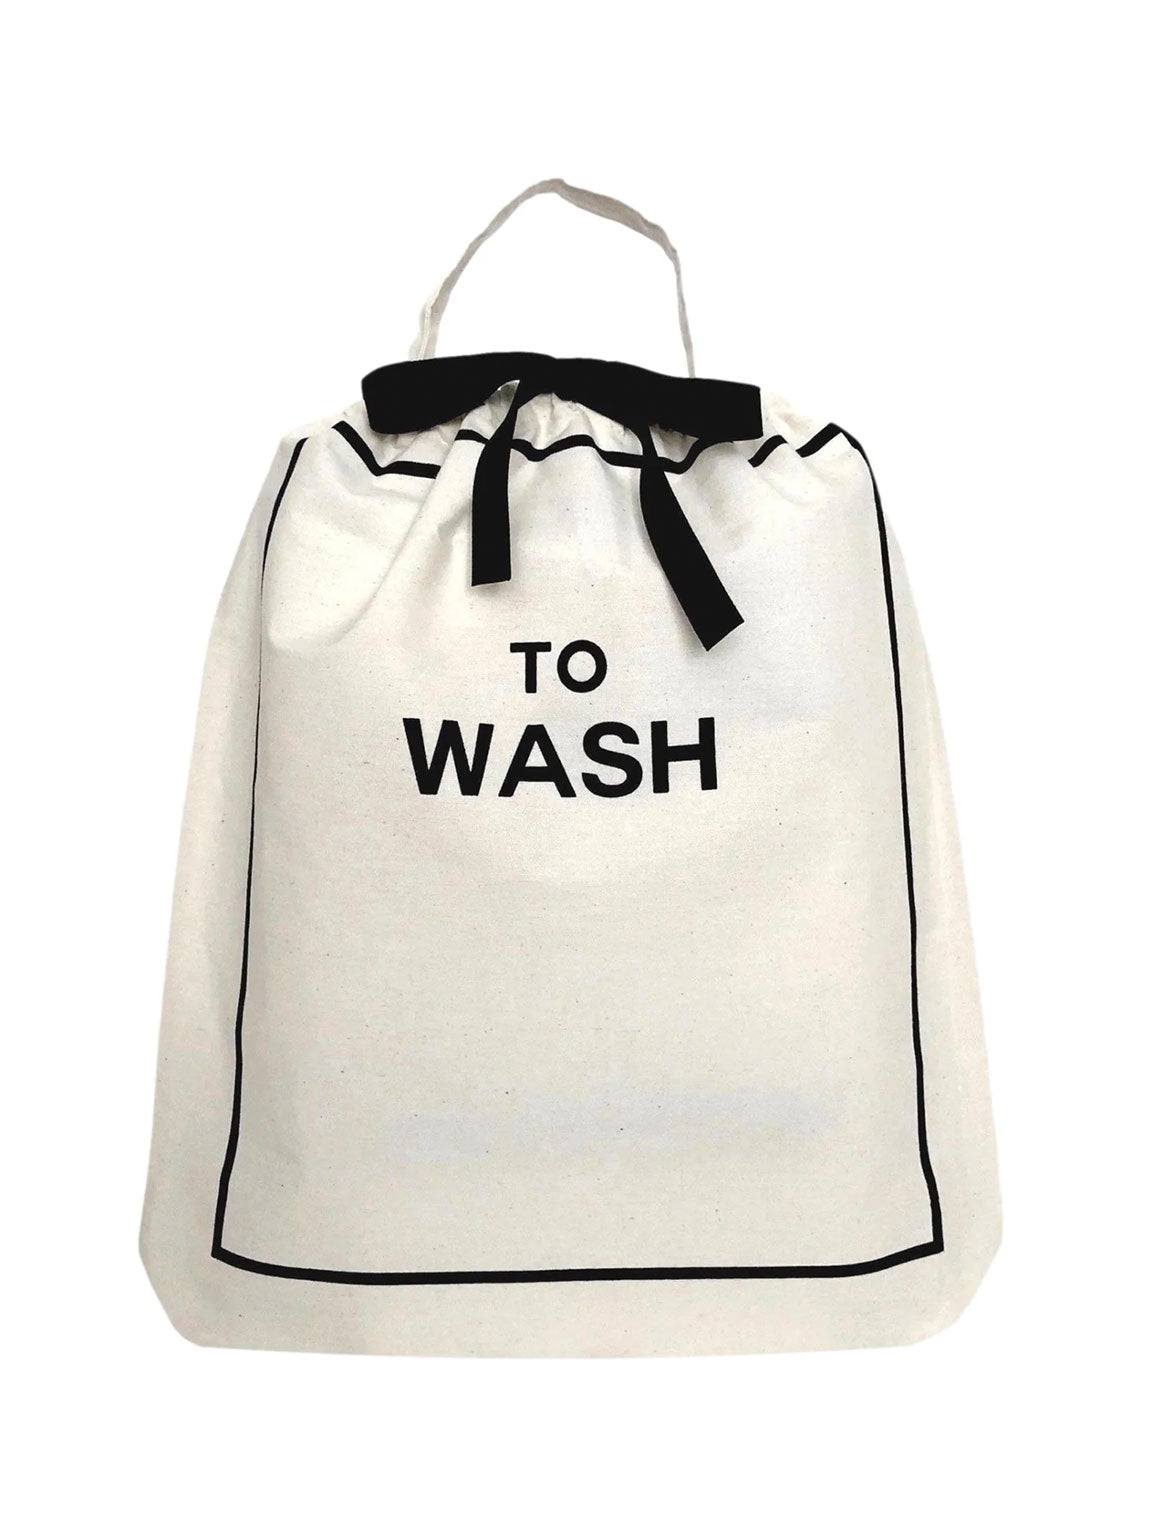 "To Wash" Laundry Bag